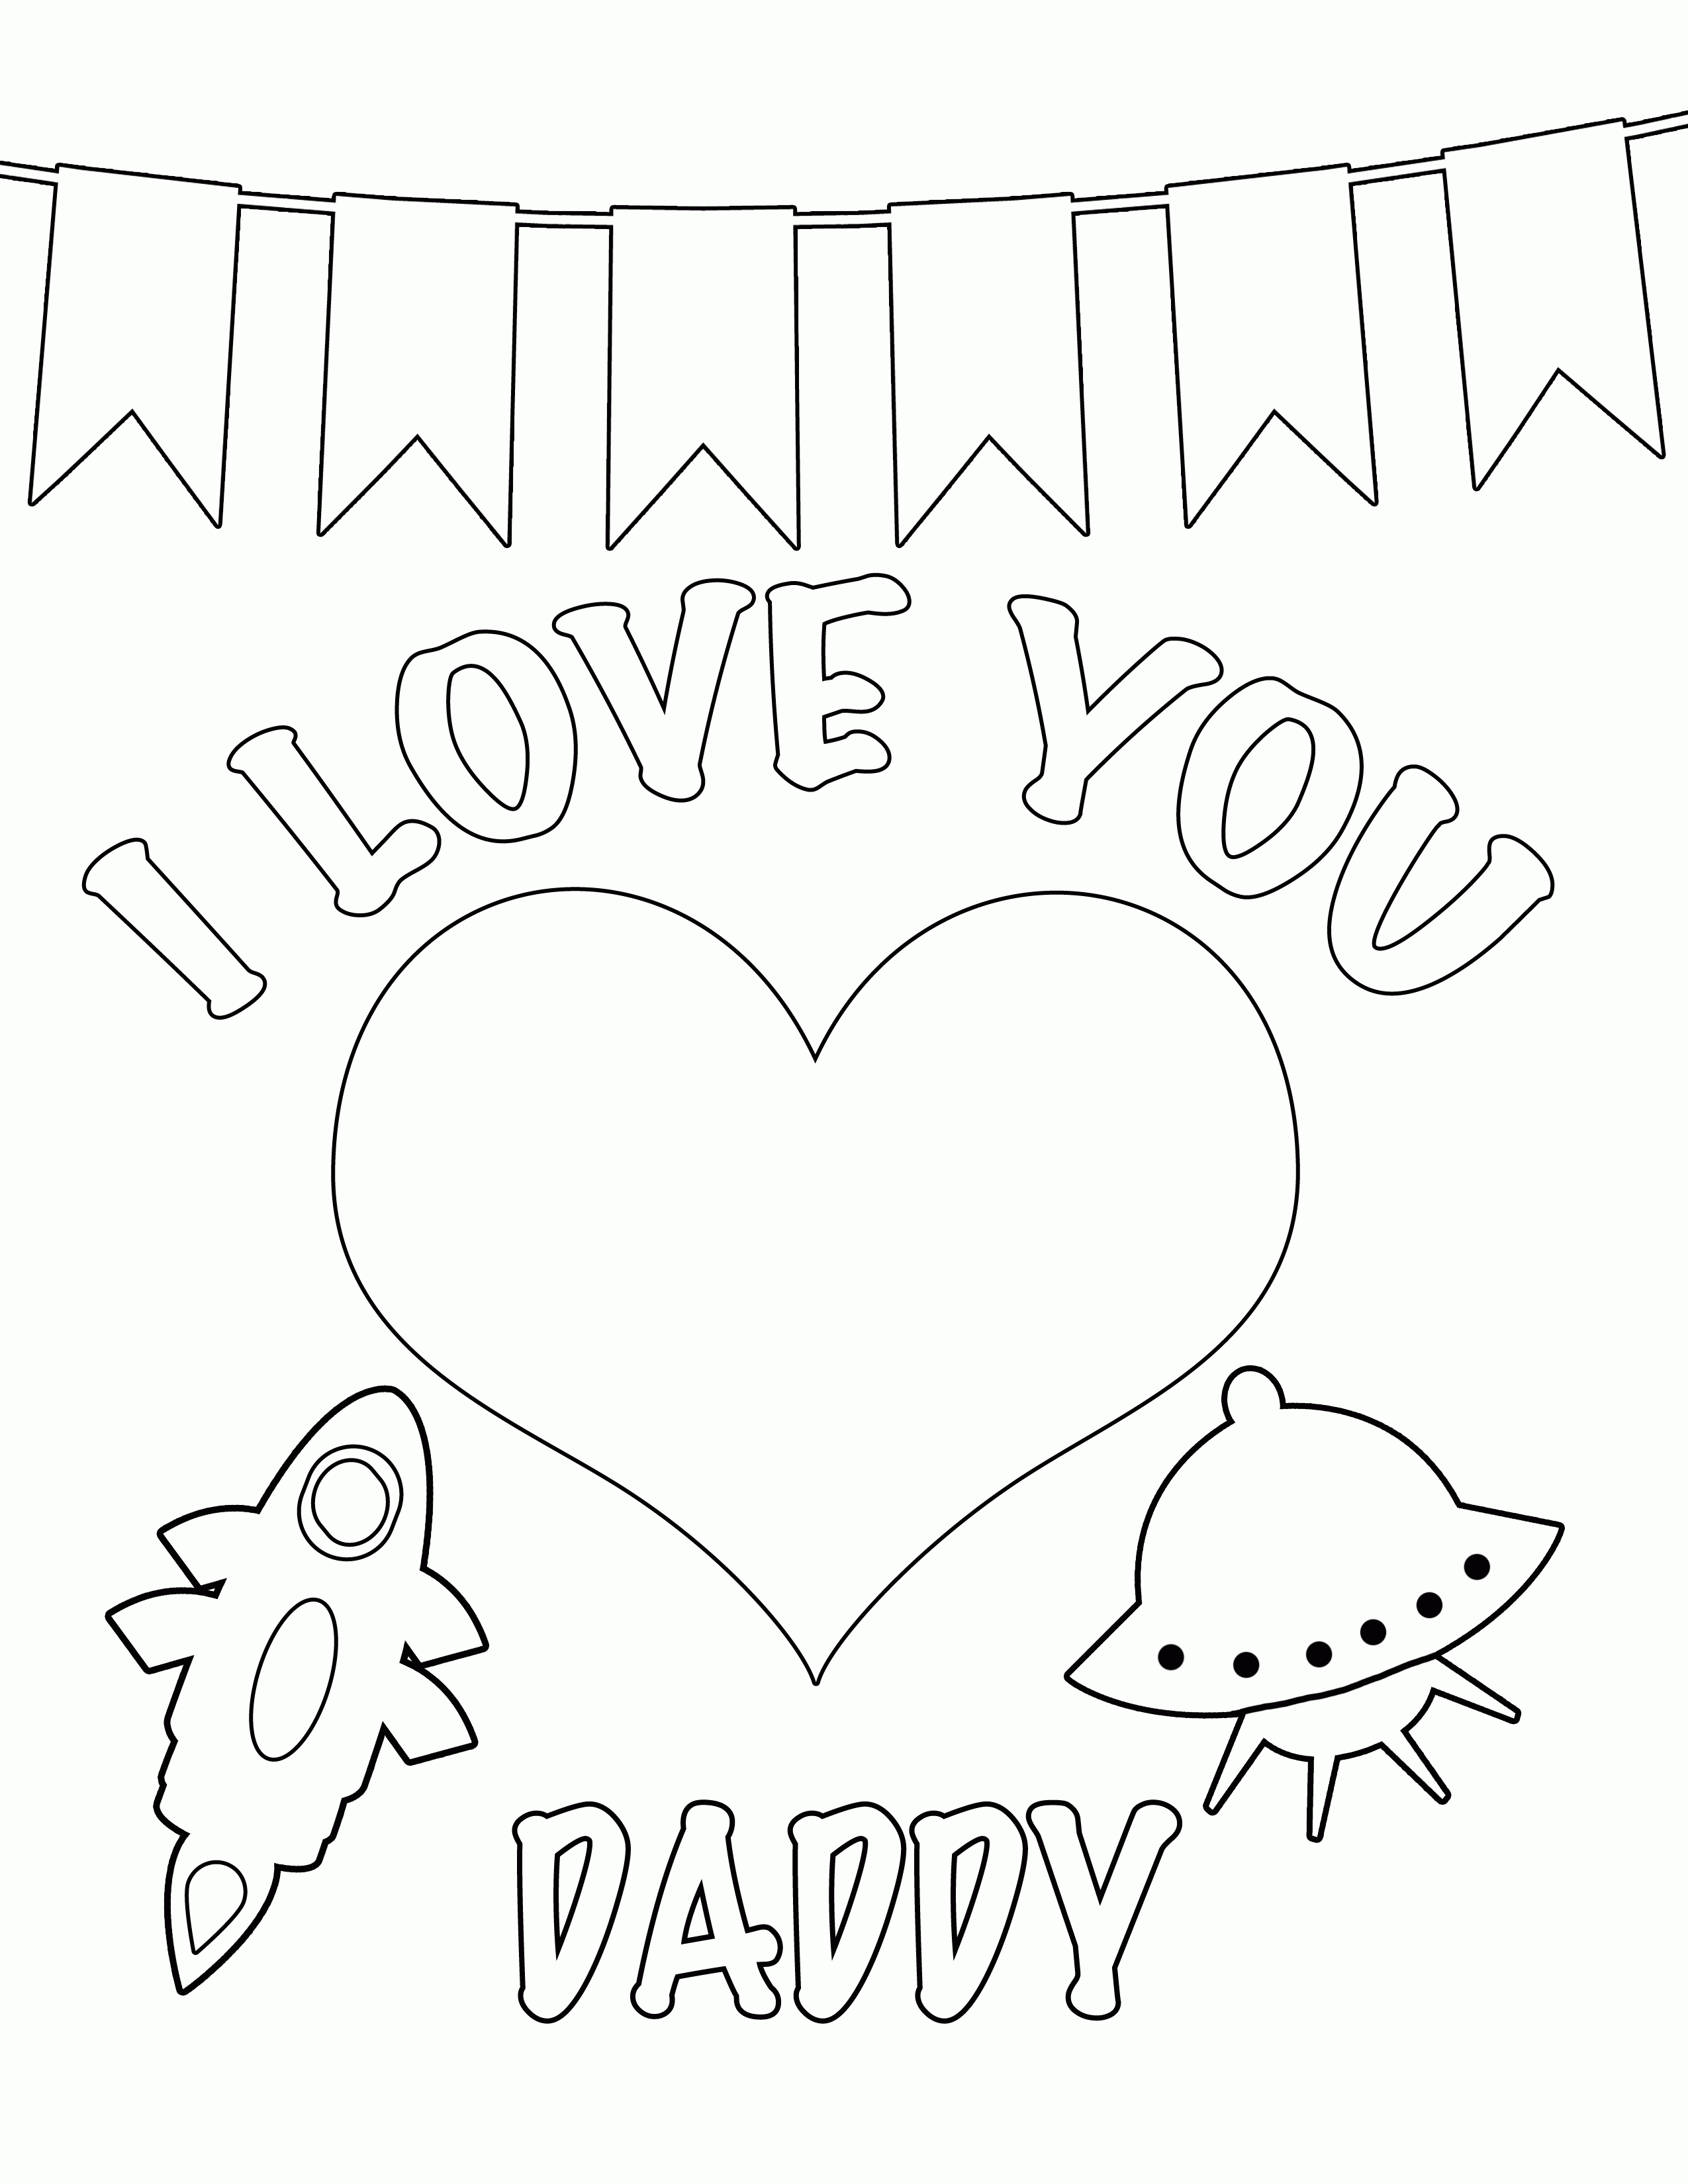 Free Happy Birthday Daddy Printable Coloring Pages, Download Free Happy